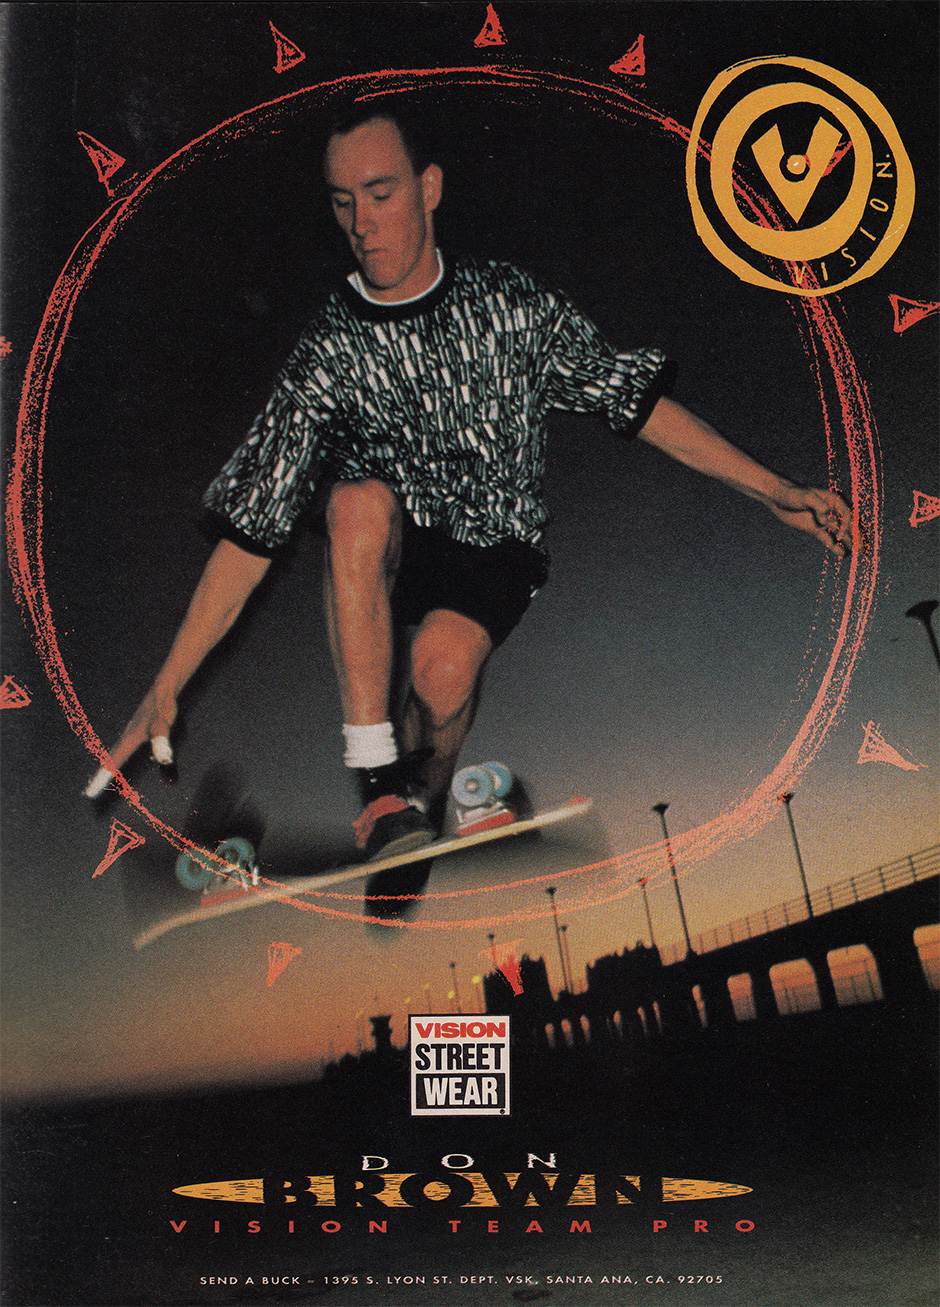 Don was the first UK skateboarder to get a pro board from an American company. Vision ad from 1989